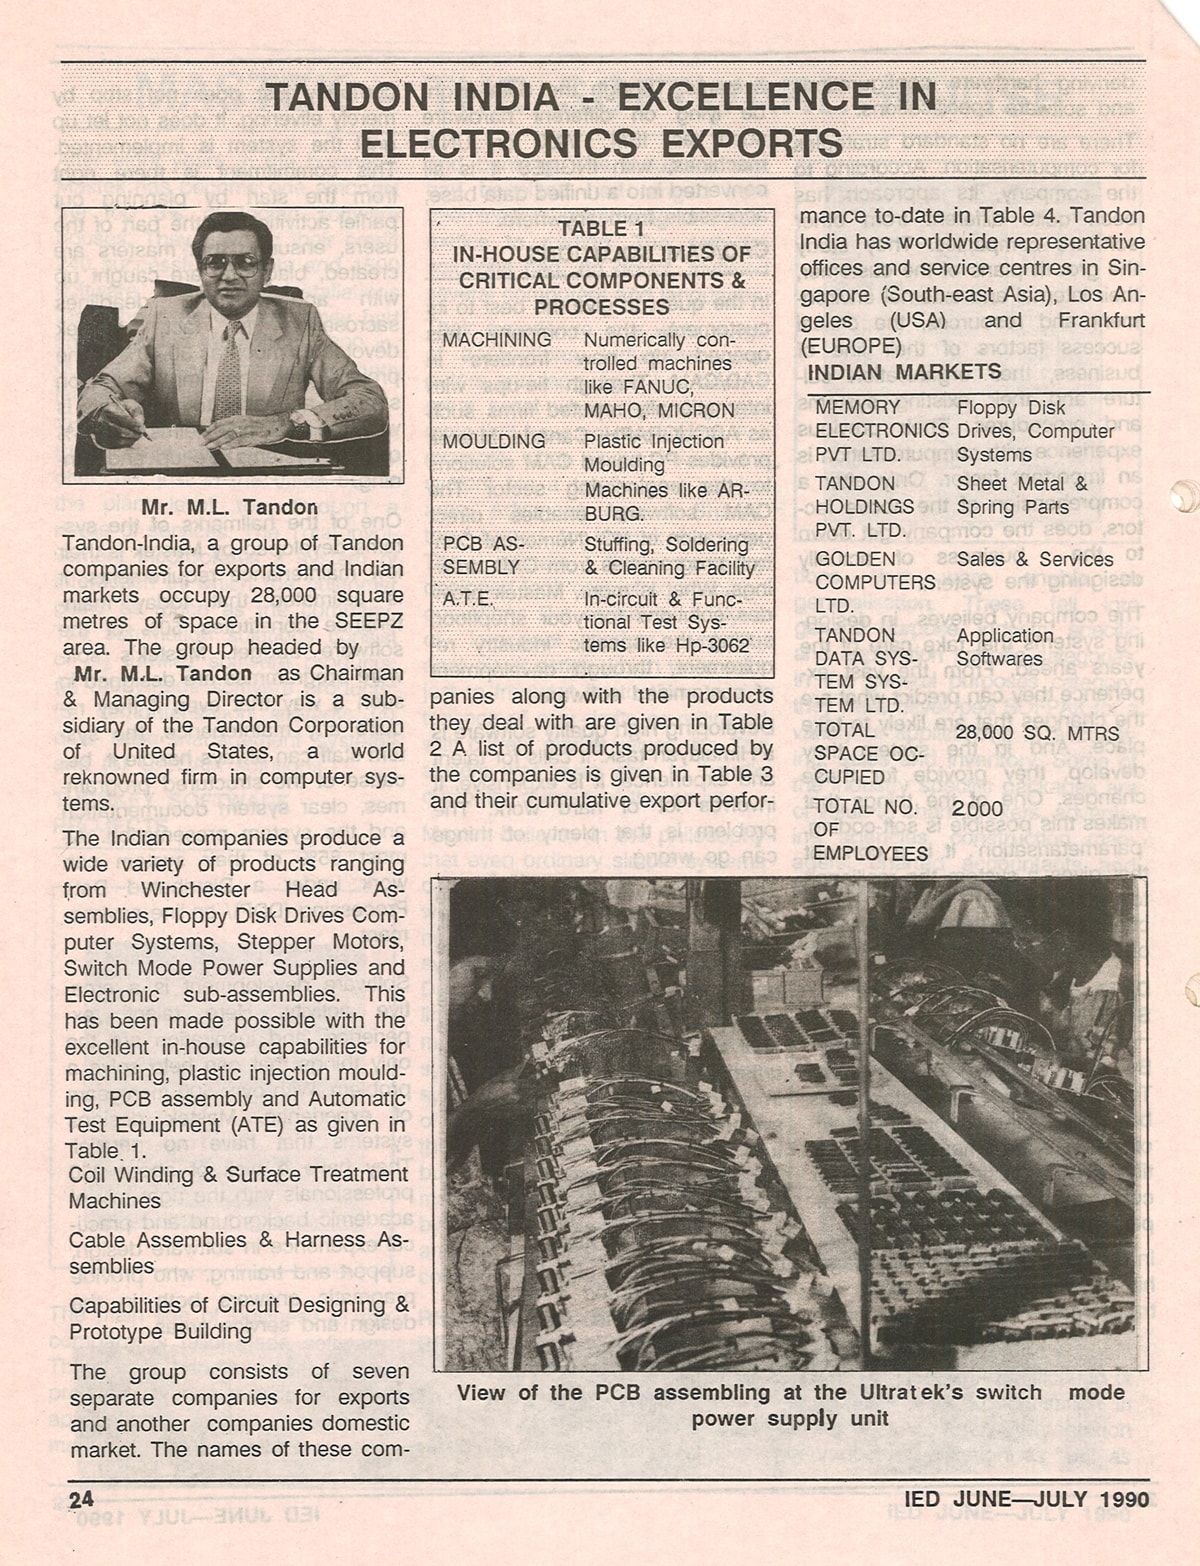 1990 July IED Tandon India Excellence In Electronics Exports Tandon Group Manohar Lal Tandon